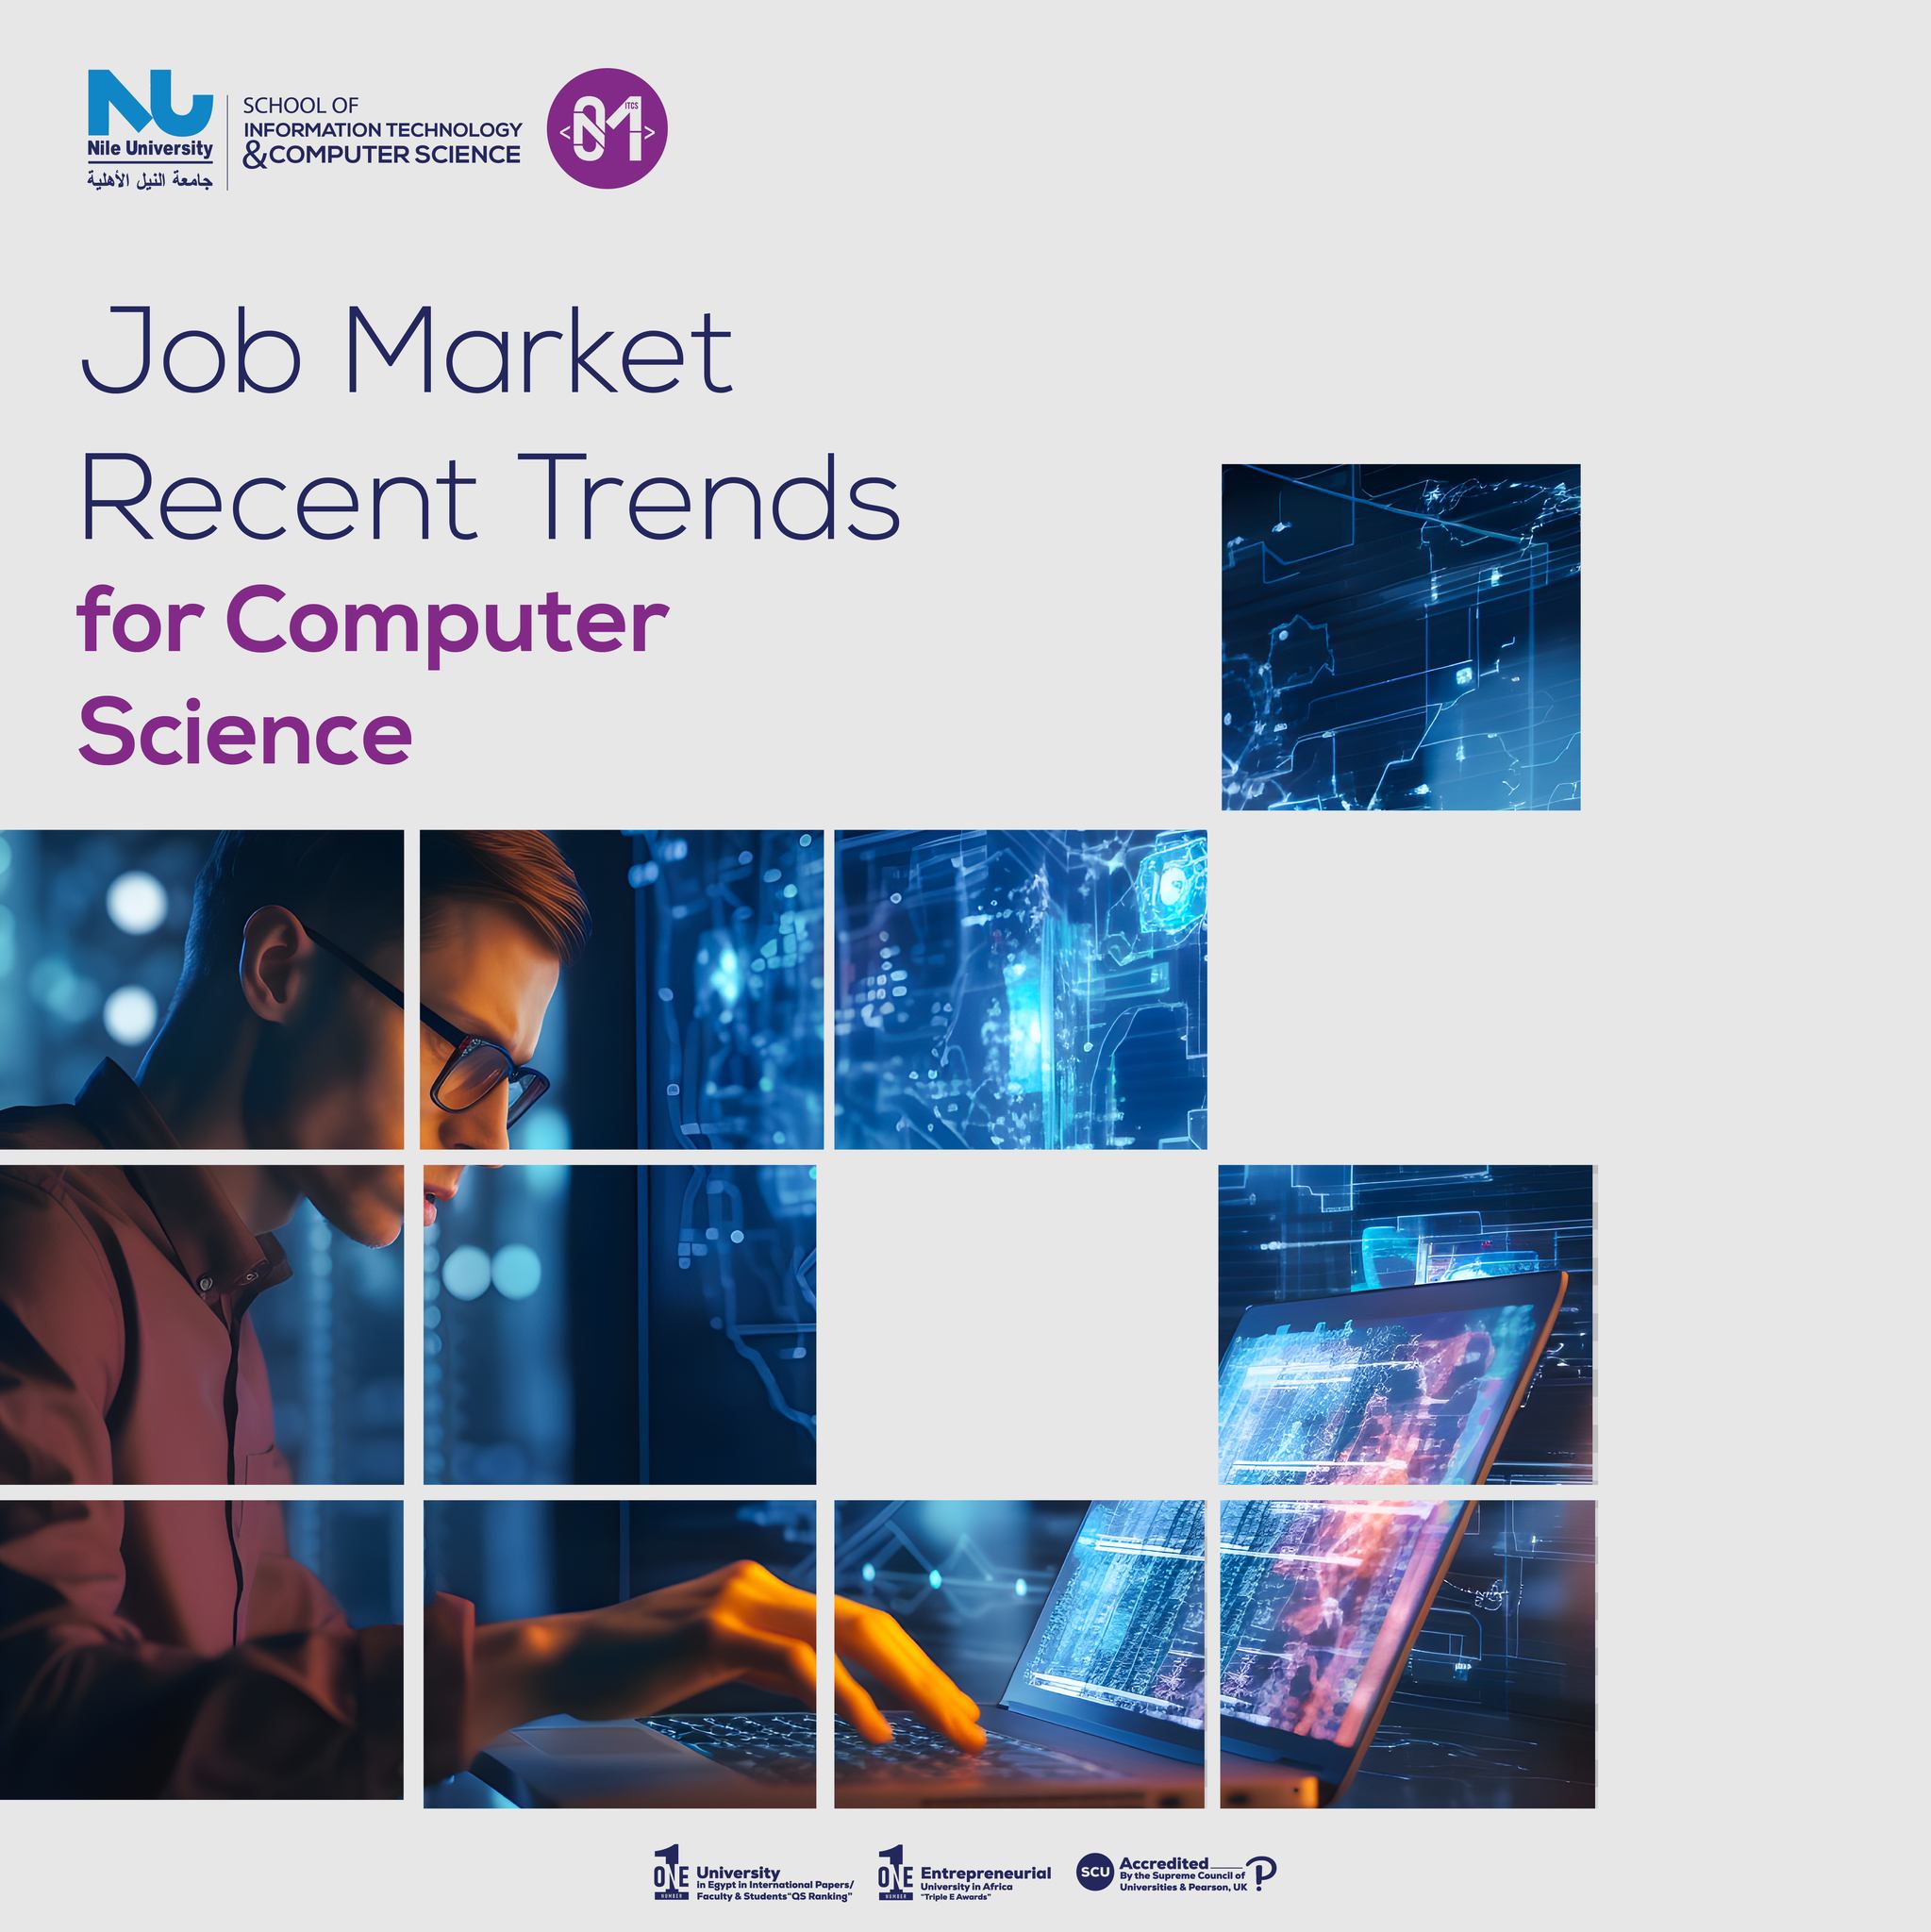  the job market needs for Computer Science